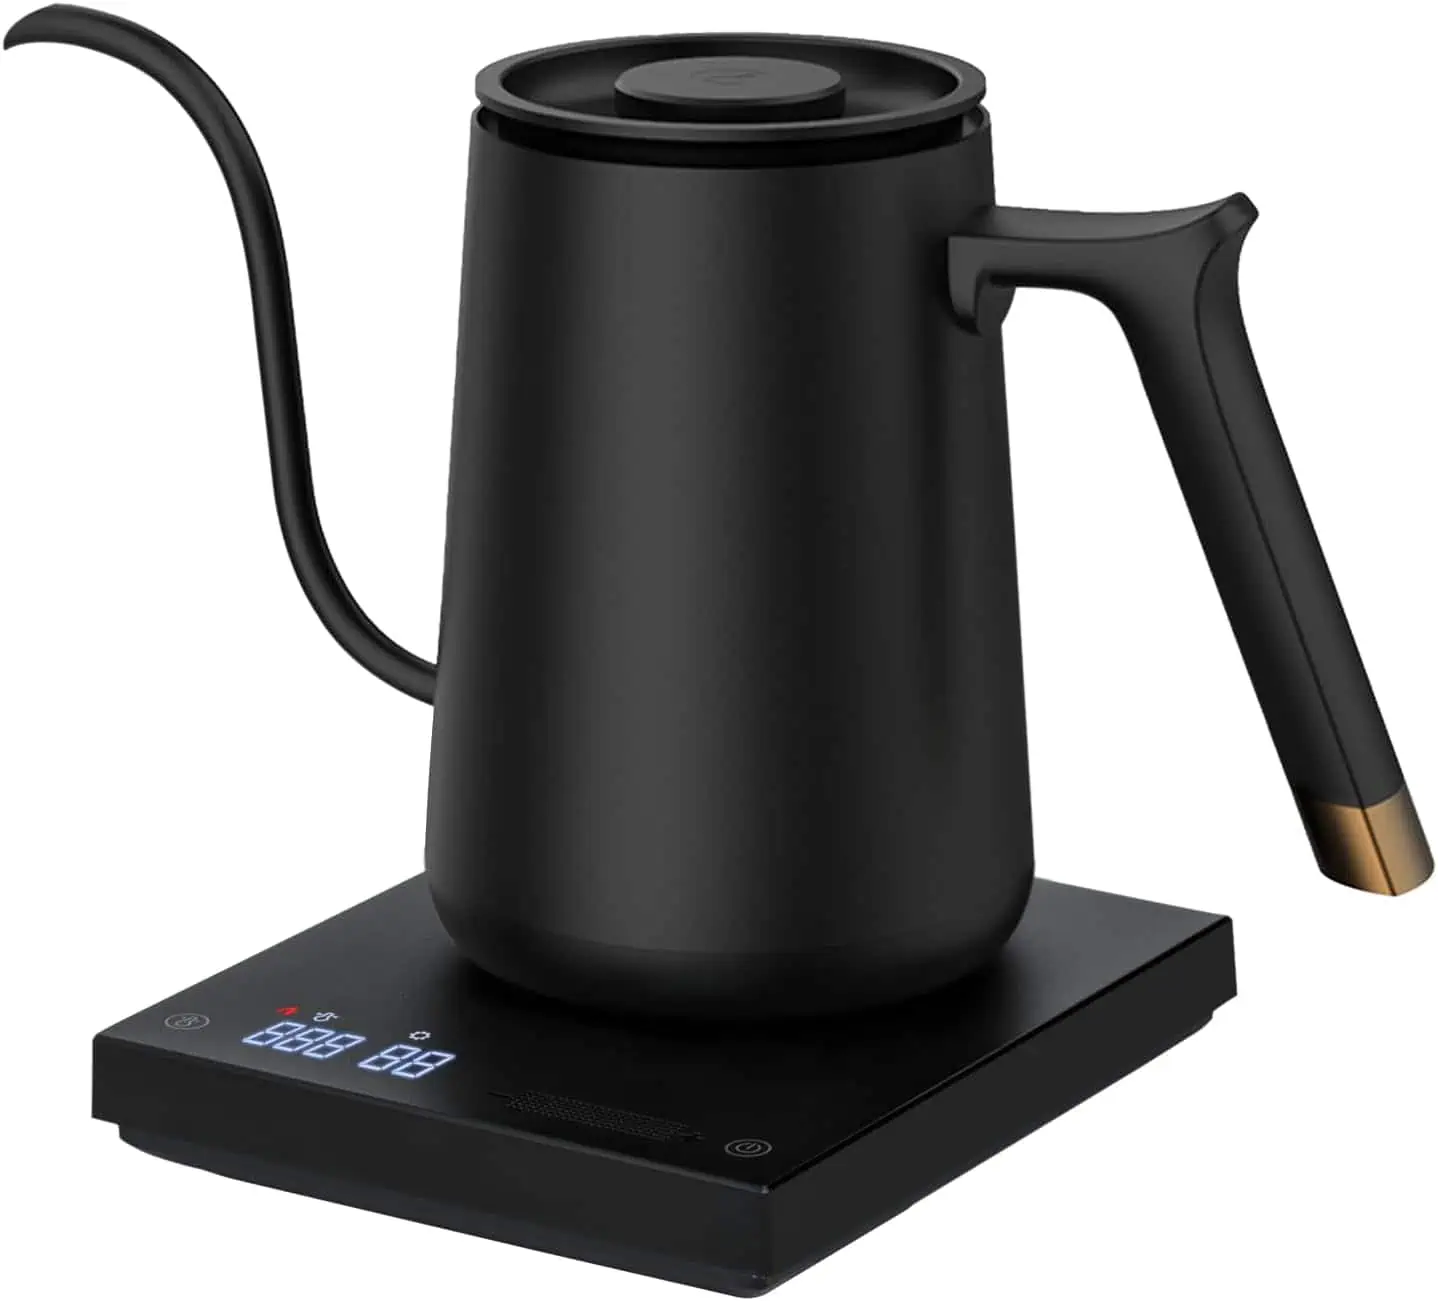 TIMEMORE Electric Gooseneck Kettle with Temperature Control, 600ml, Black